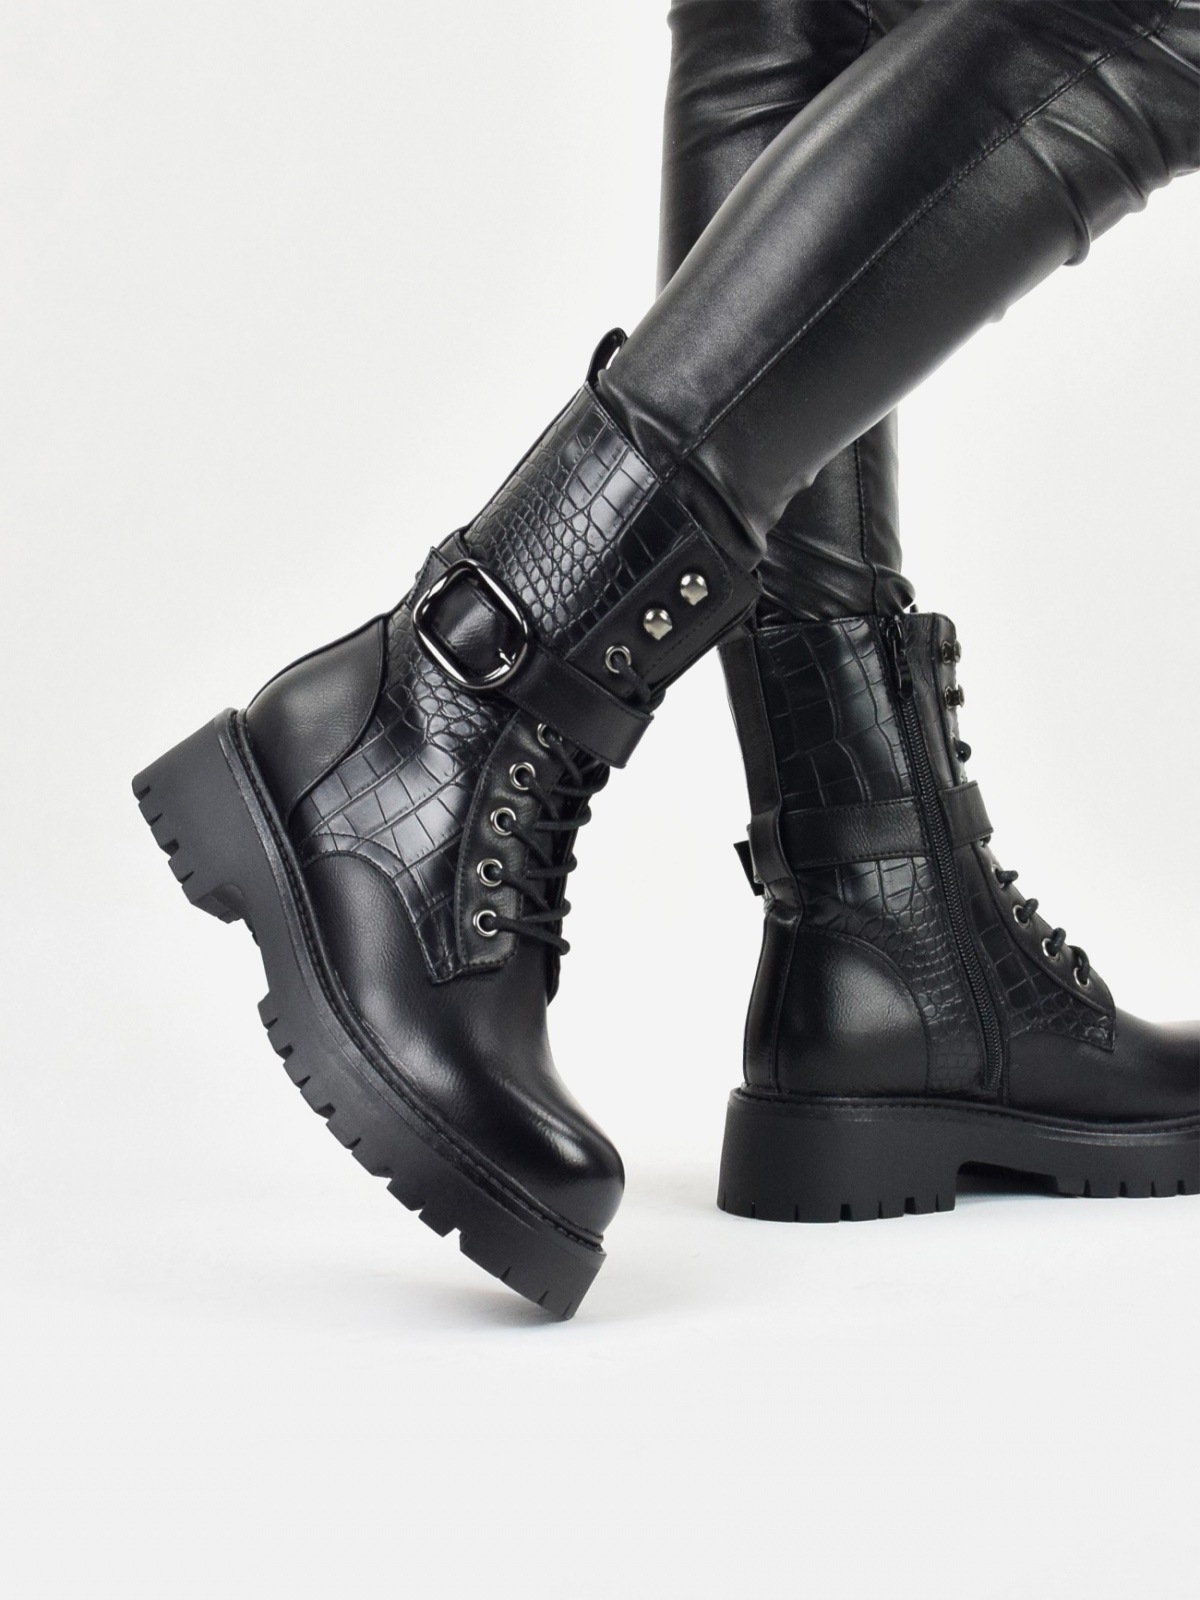 Women's ankle boots in black with buckle detail